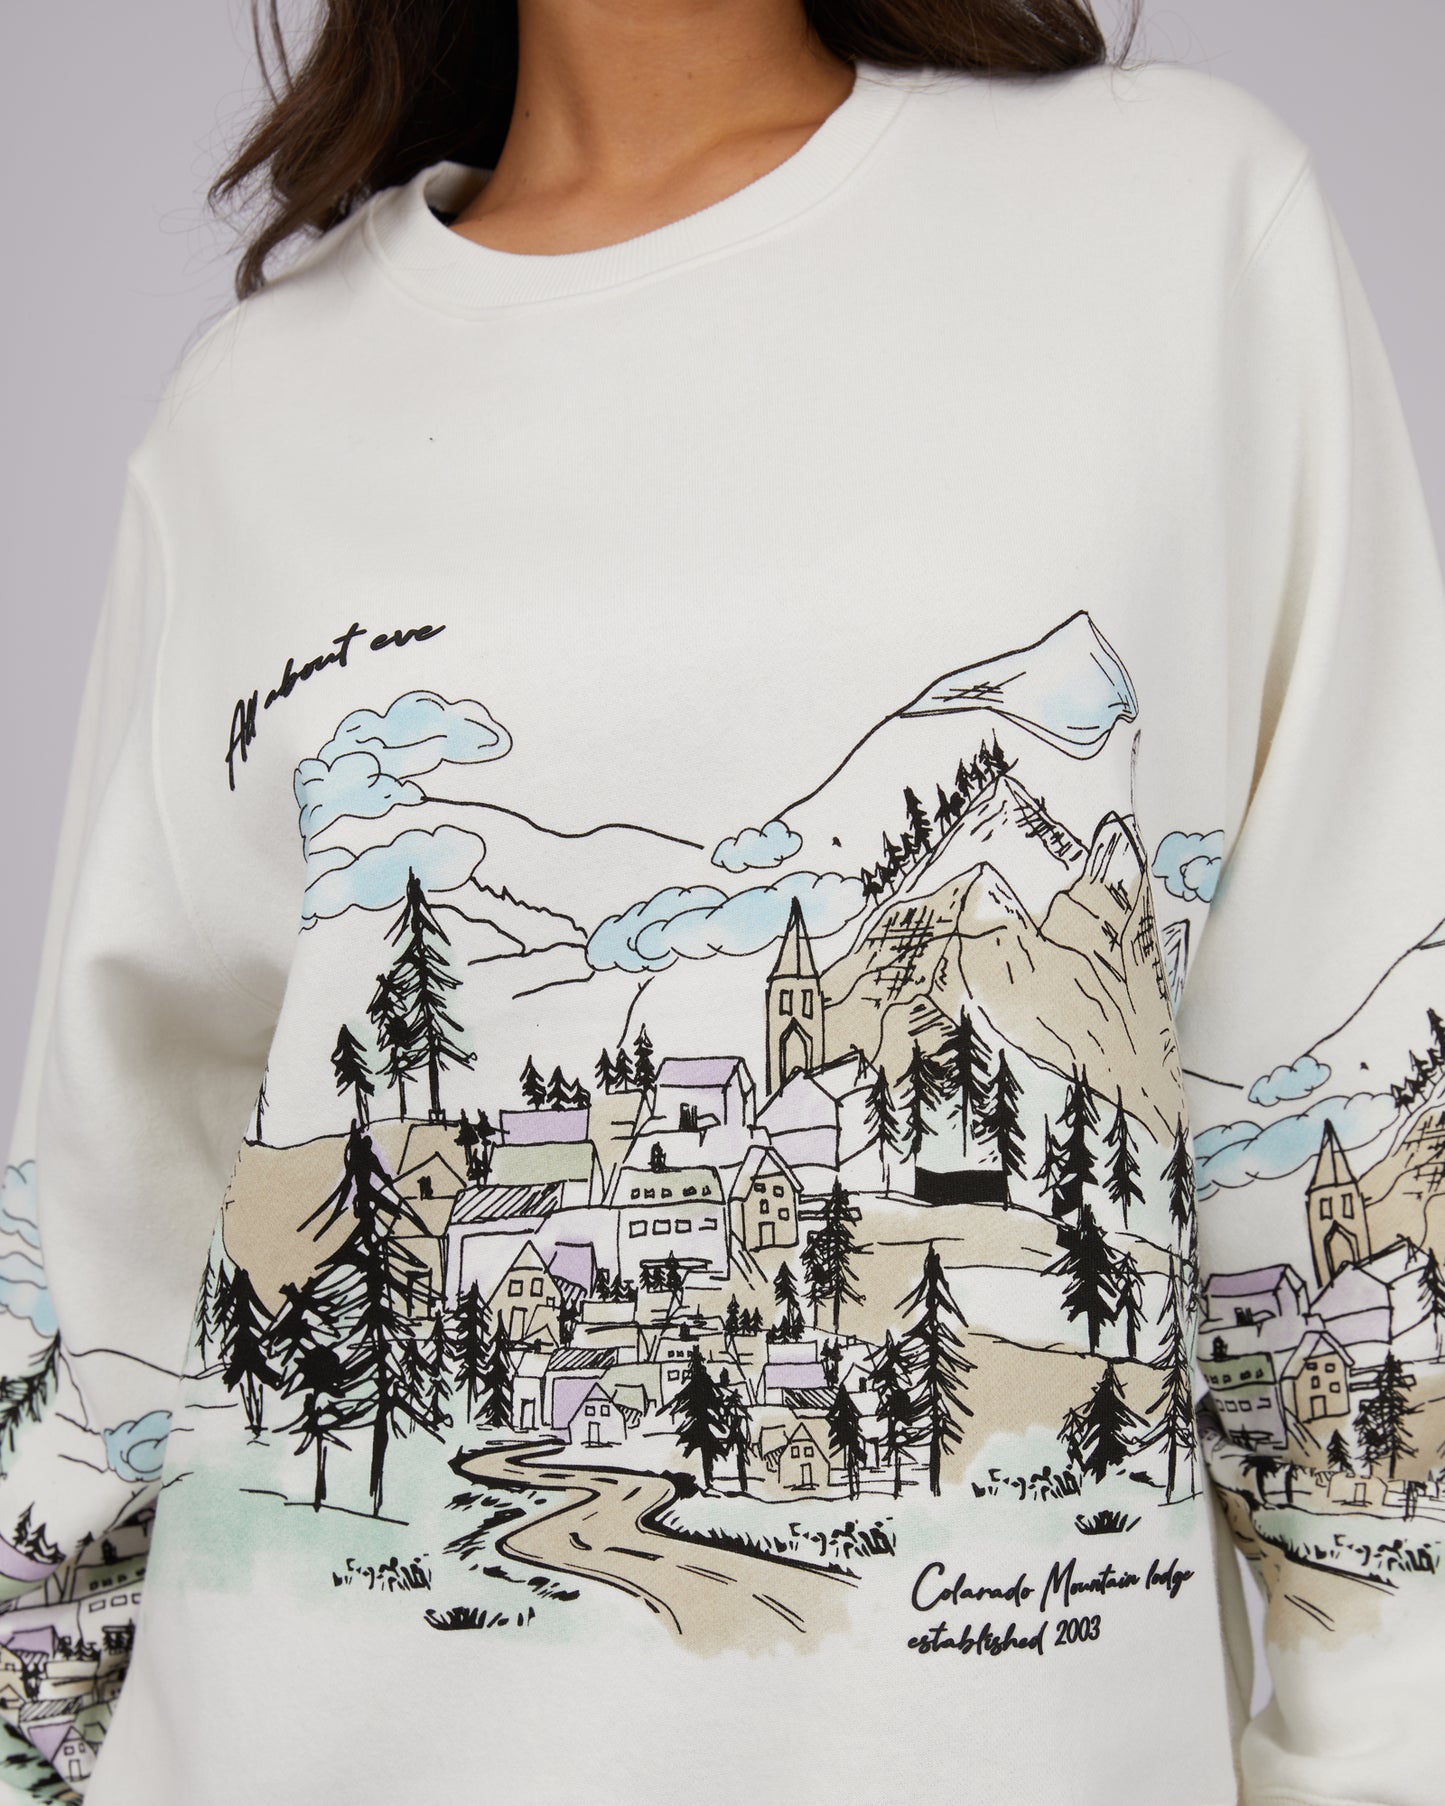 ALL ABOUT EVE Apres Ski Oversized Womens Crew - Vintage White